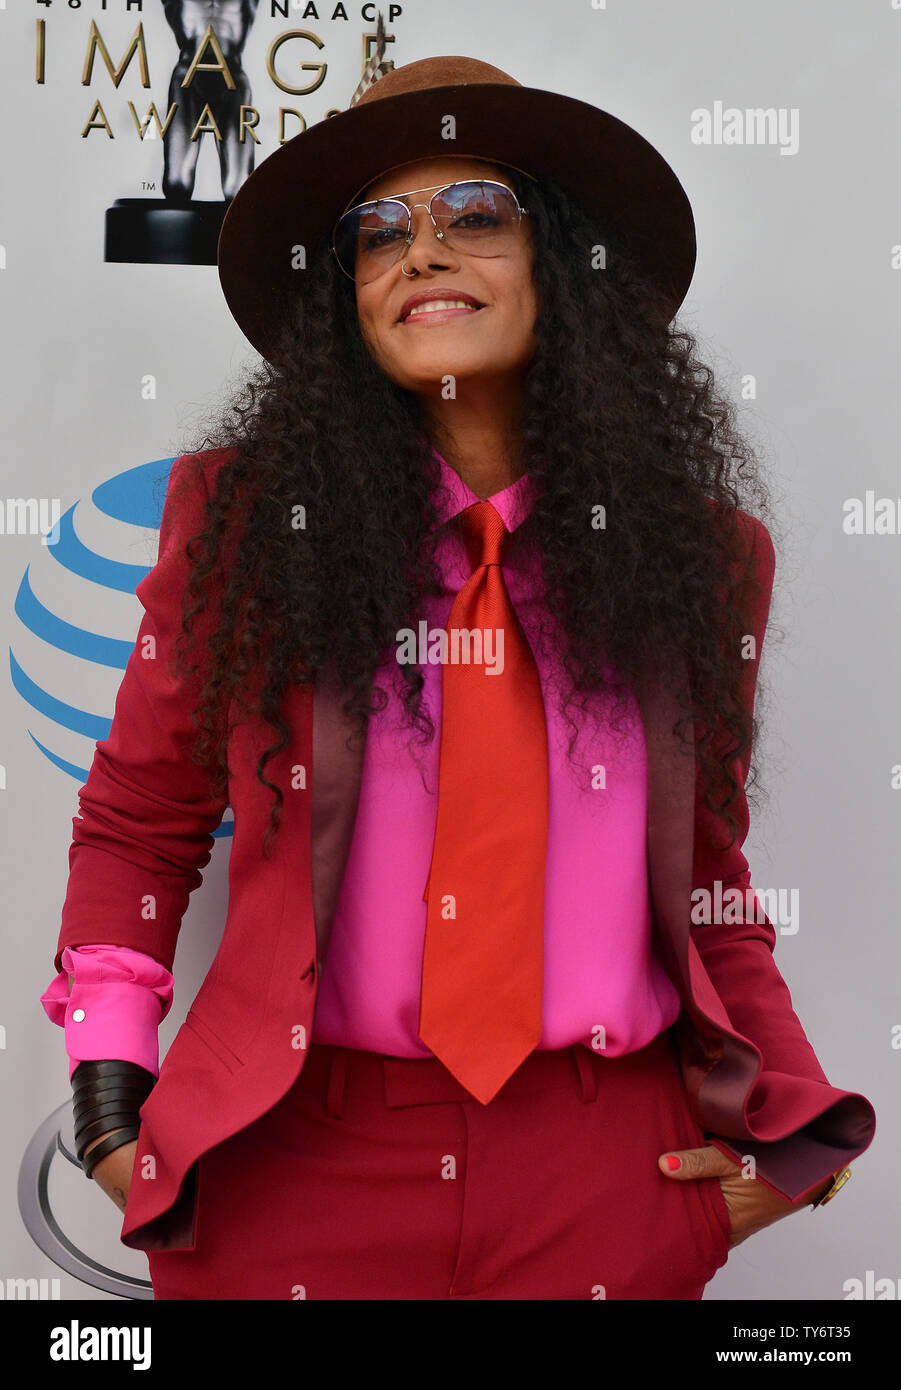 Cree Summer High Resolution Stock Photography and Images - Alamy